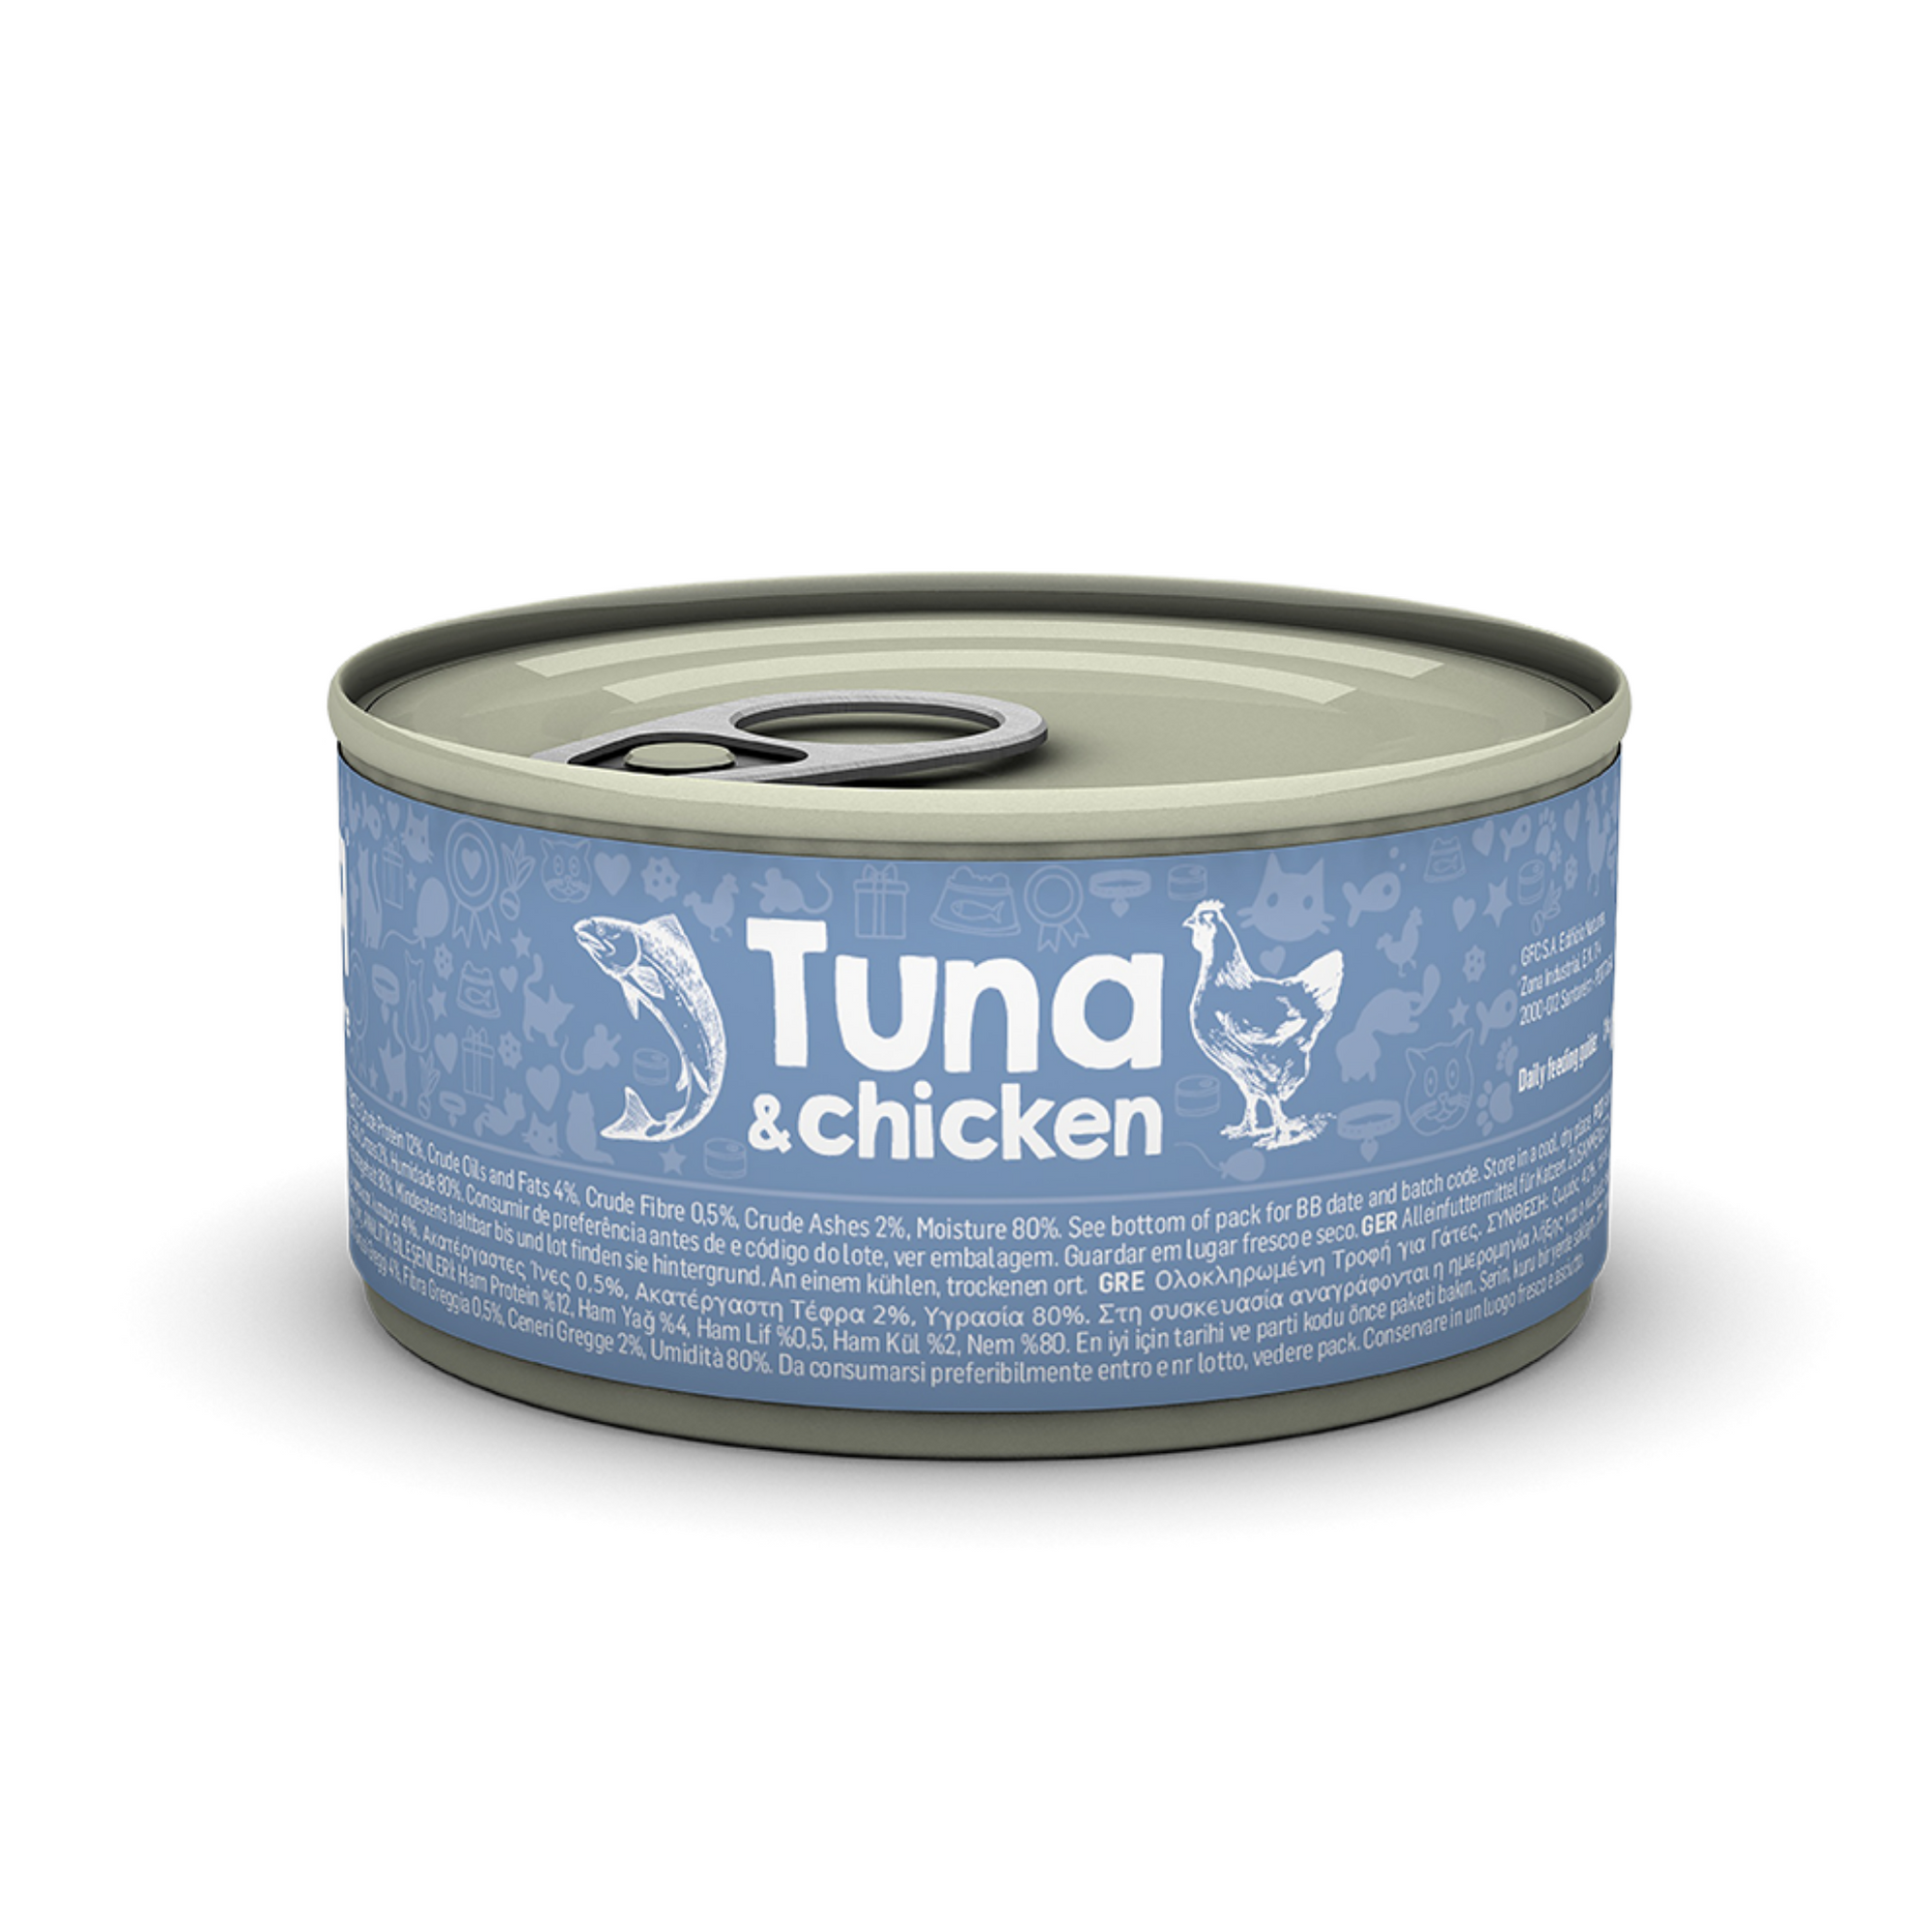 Canned tuna and chicken meat for cats and kittens